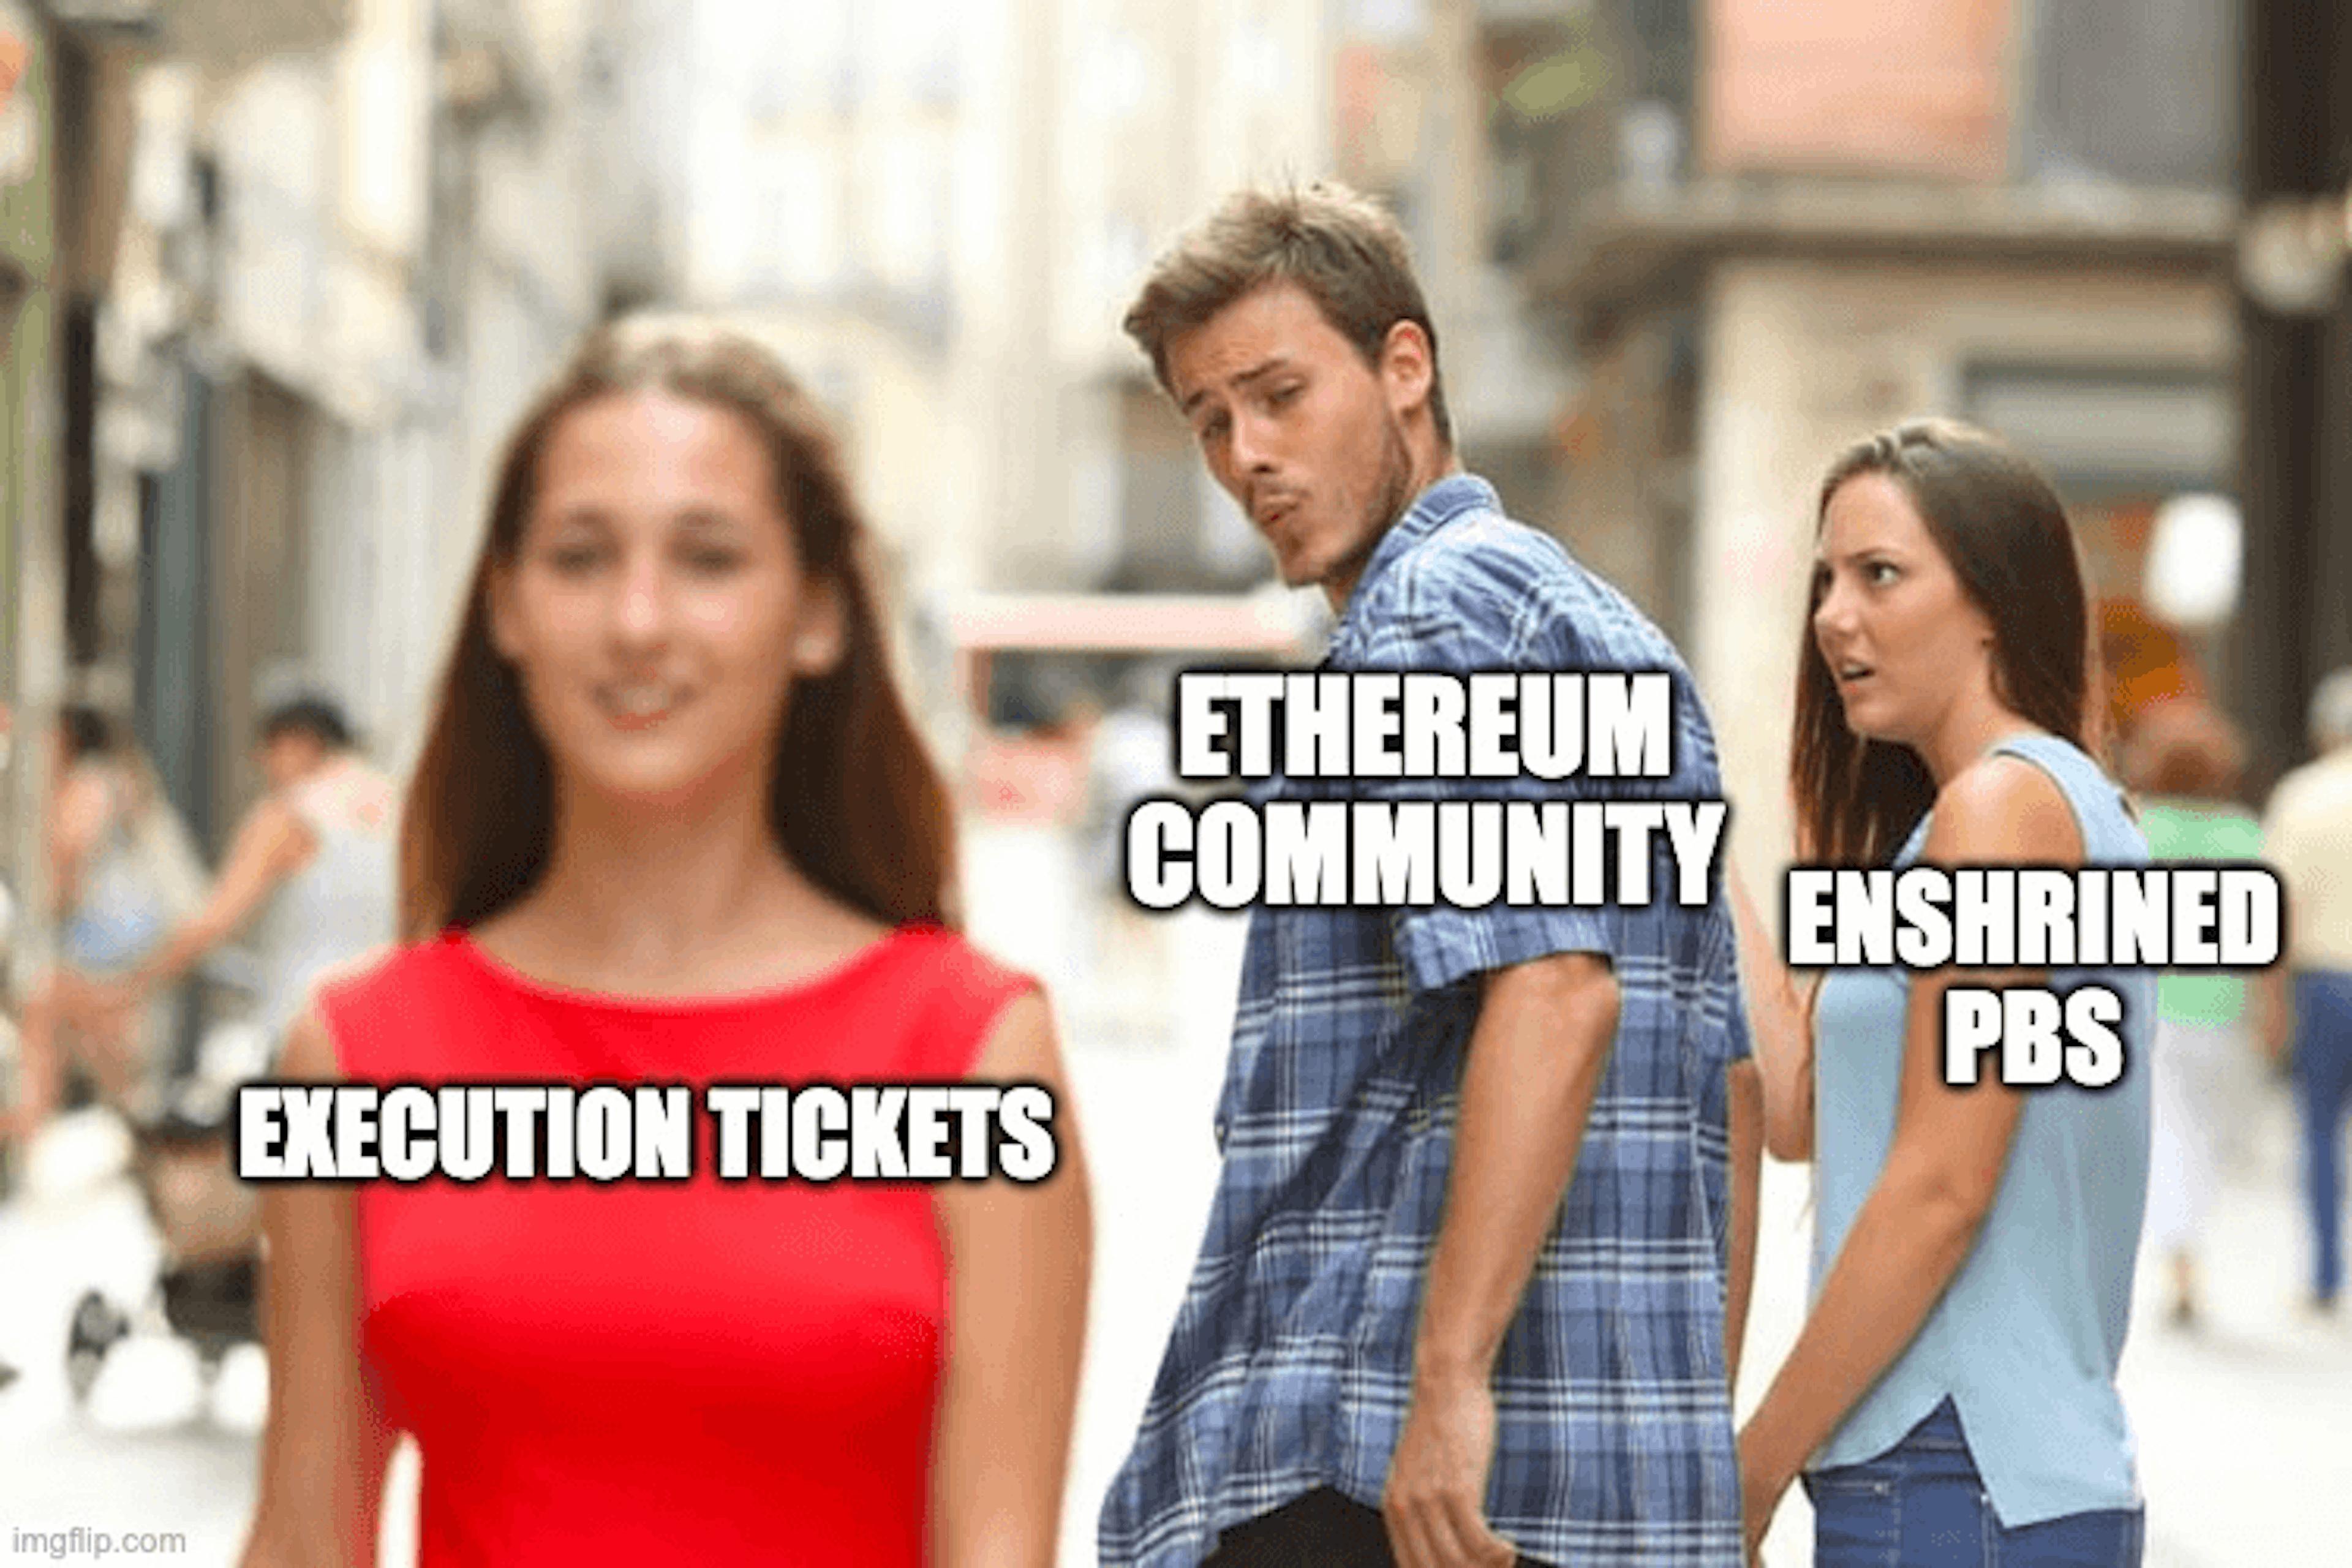 Love Triangle: Execution Tickets, Ethereum Community, and ePBS